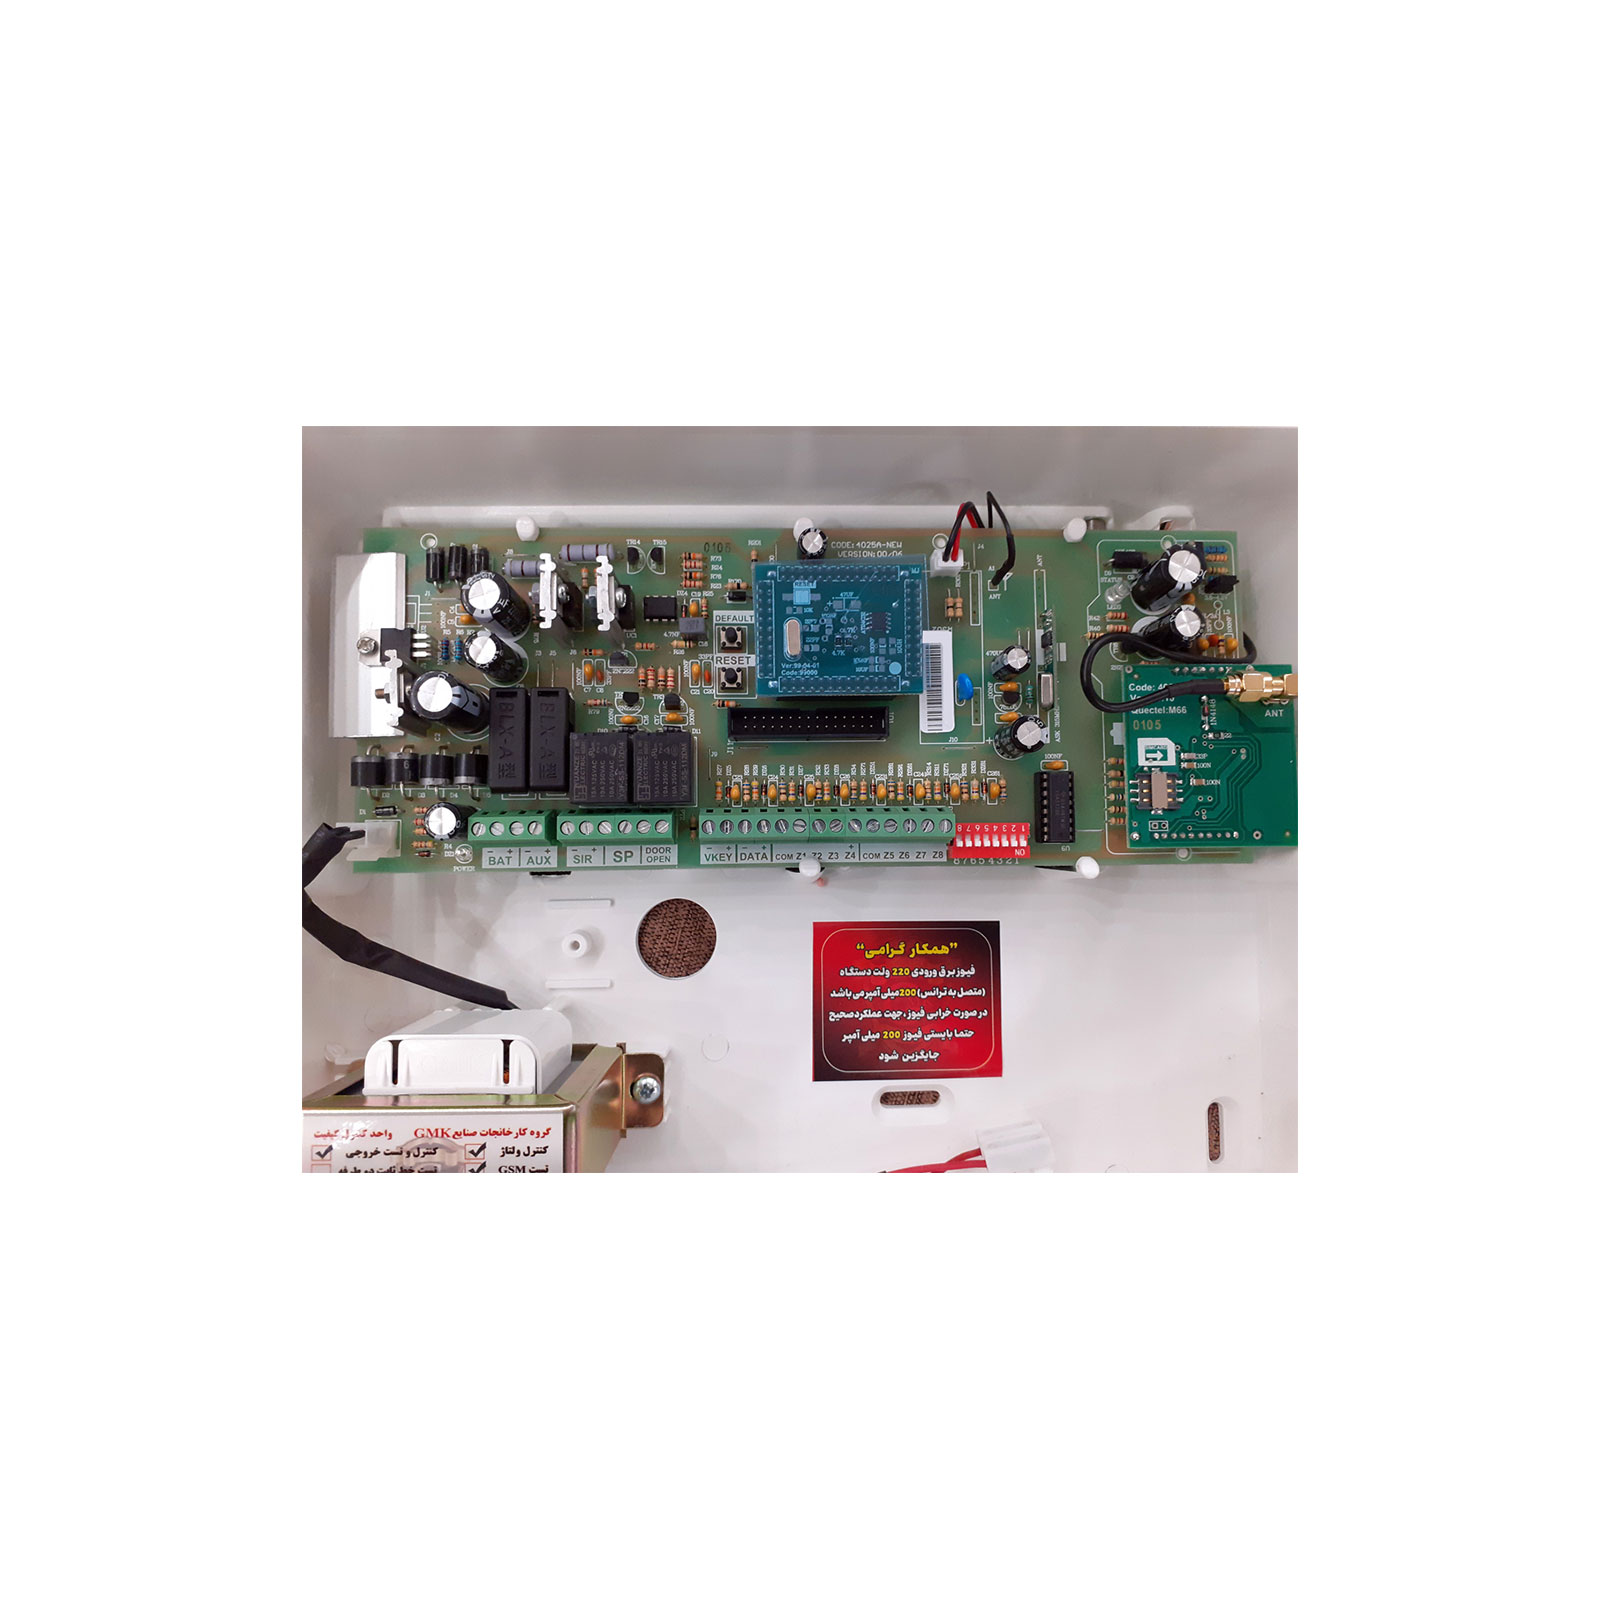 Q4-GMK-HOME-SECURITY-SYSTEM-BOARD